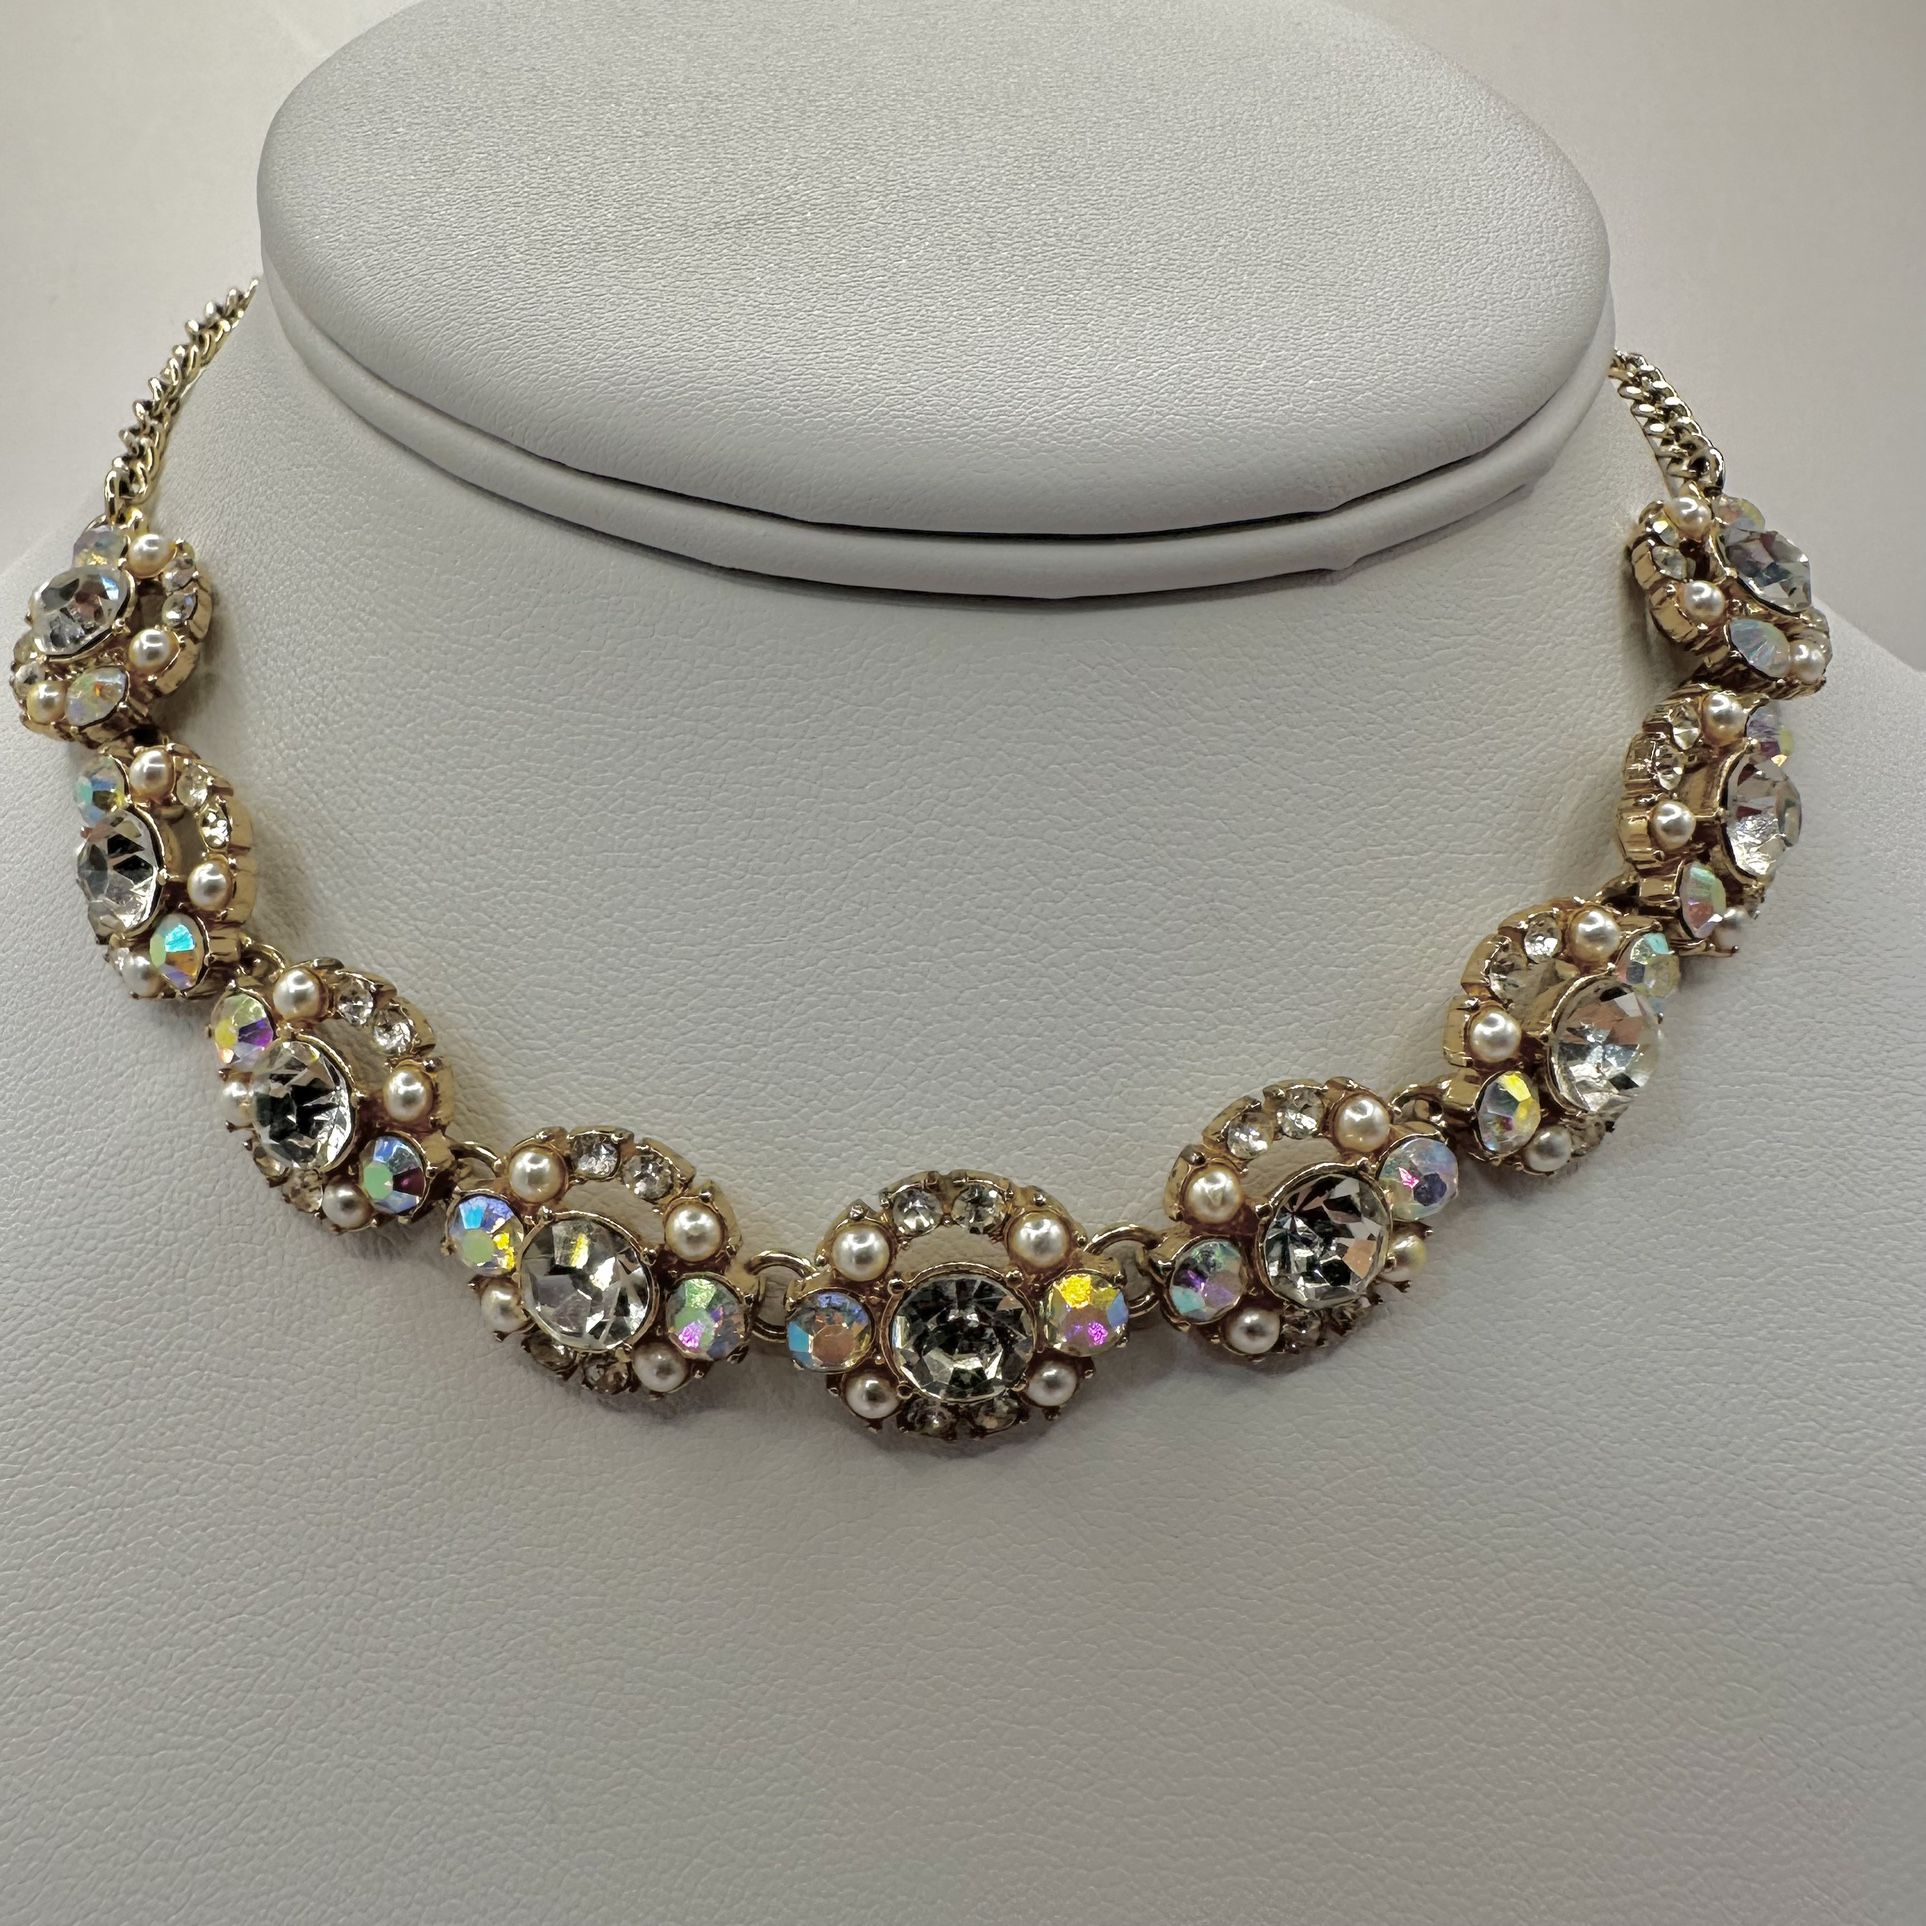 Rhinestone And Faux Pearl Choker  Necklace 